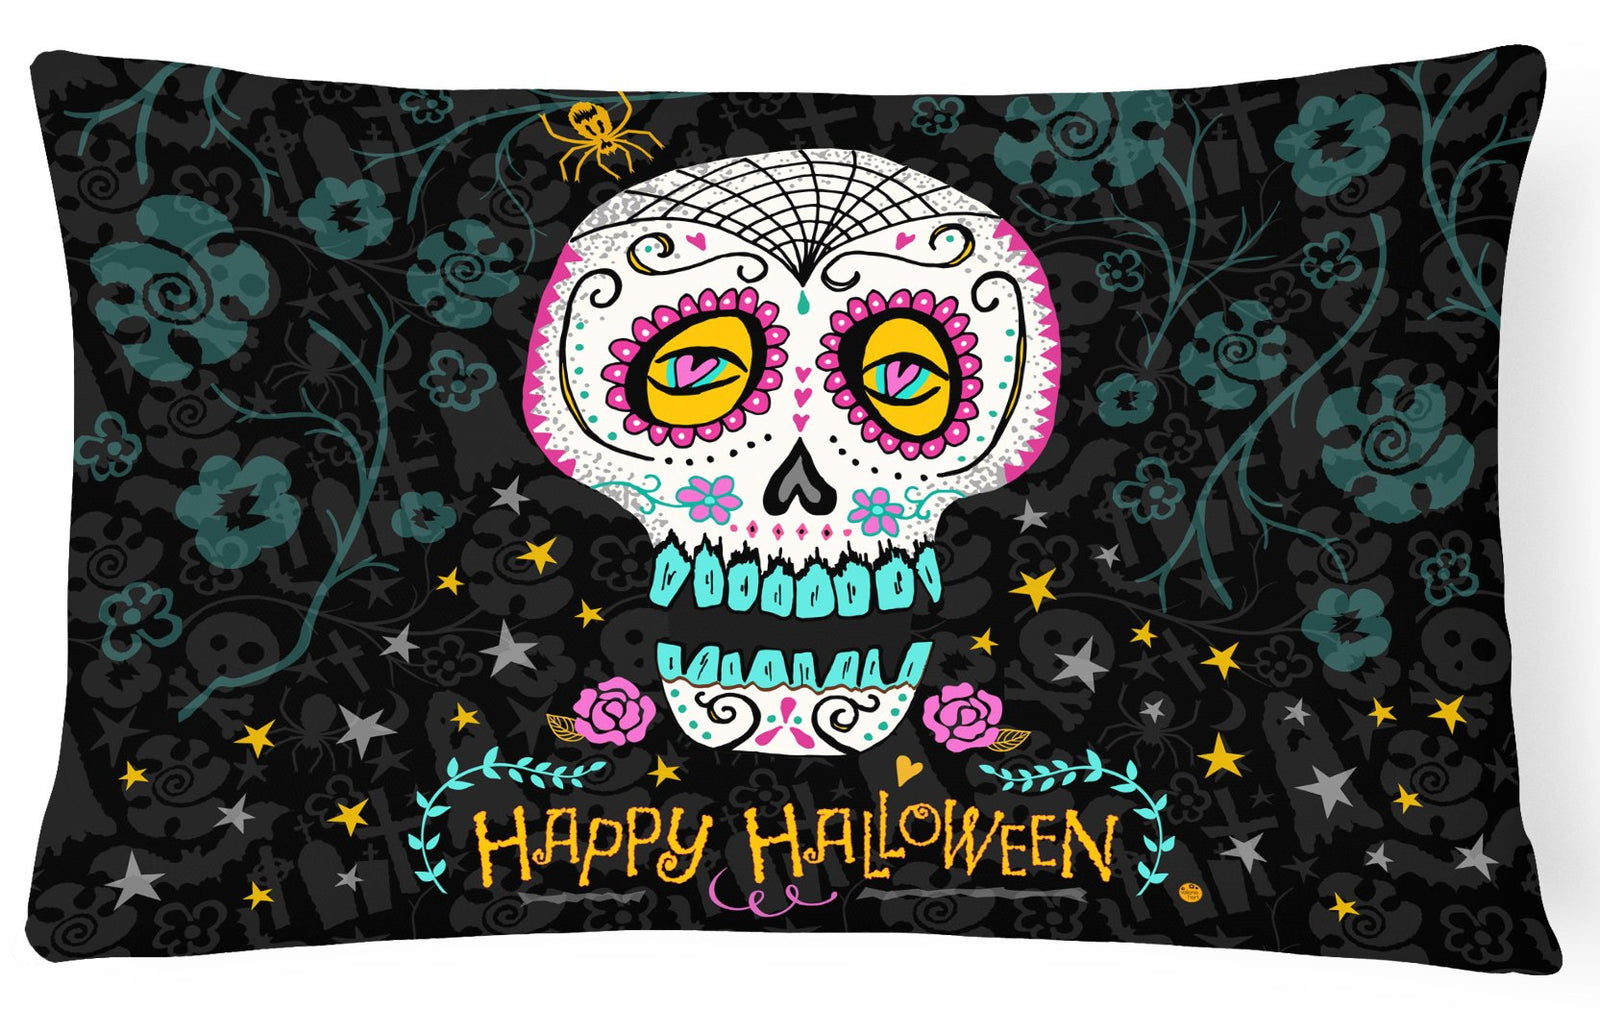 Happy Halloween Day of the Dead Canvas Fabric Decorative Pillow VHA3035PW1216 by Caroline's Treasures